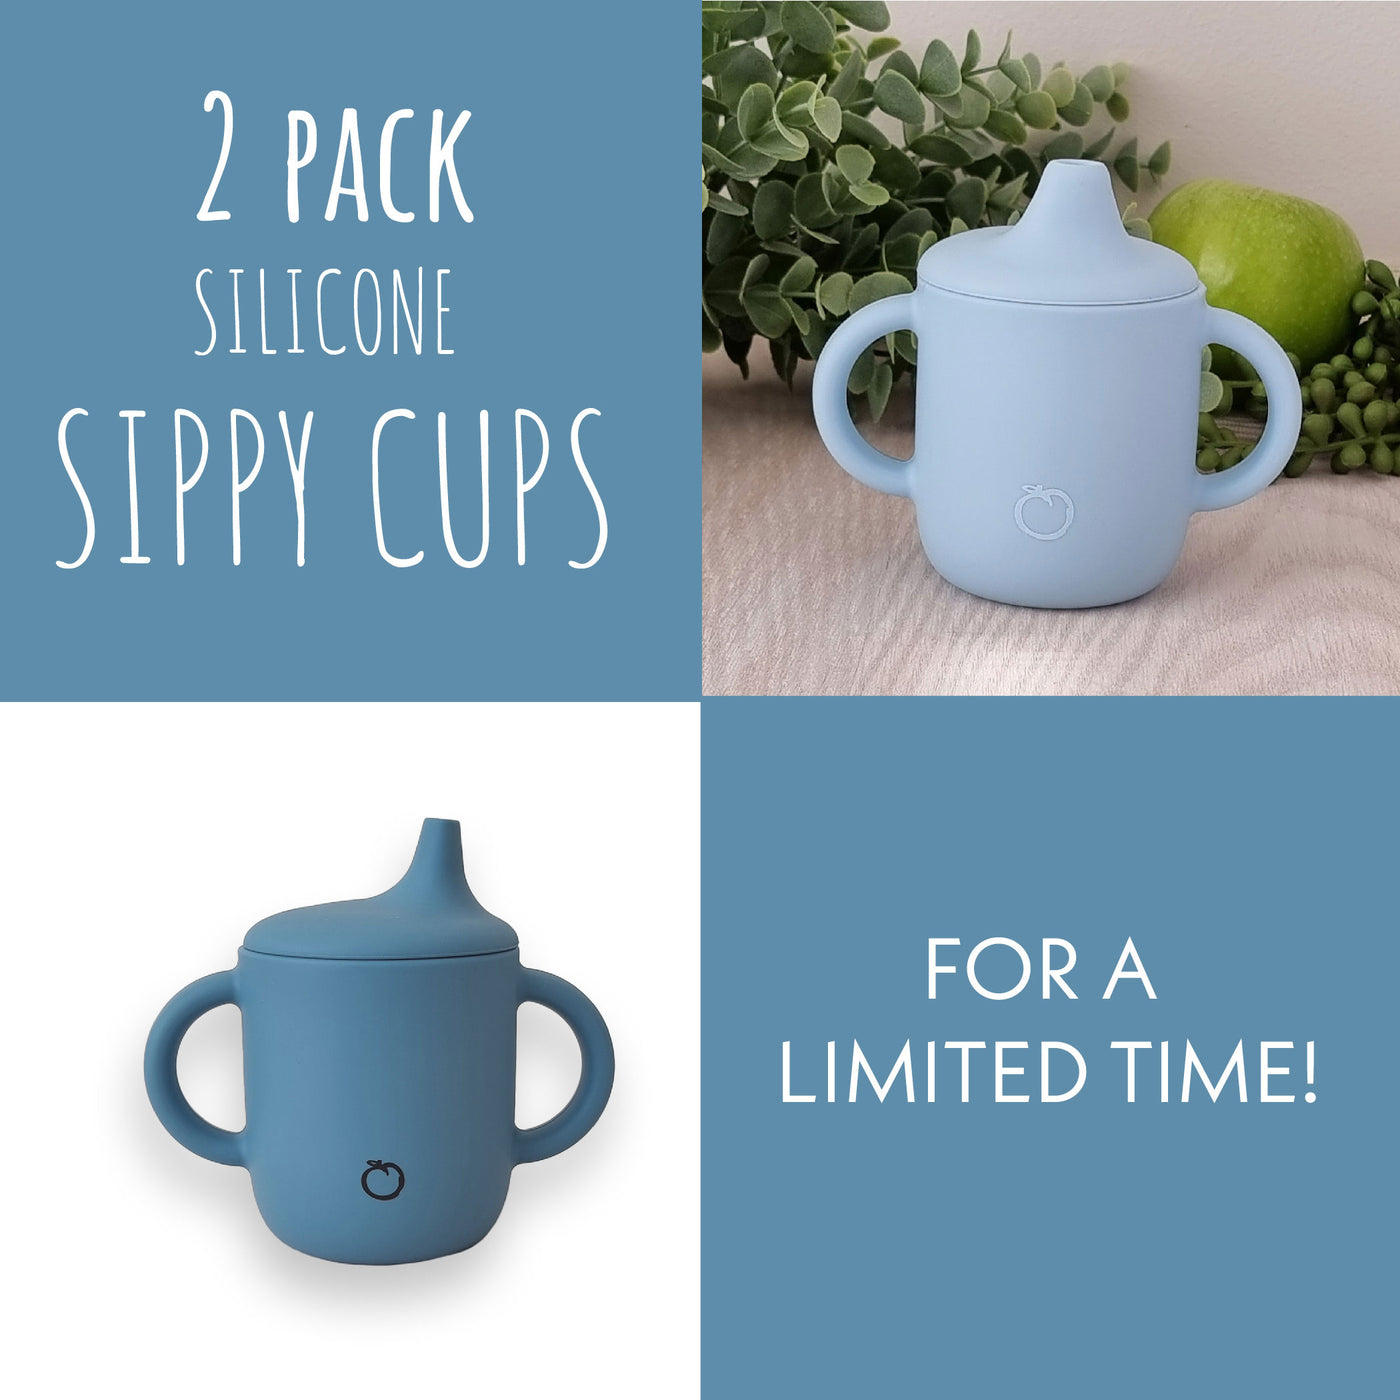 Plum 2pk Silicone Sippy Cups Bundle - Blue & Teal